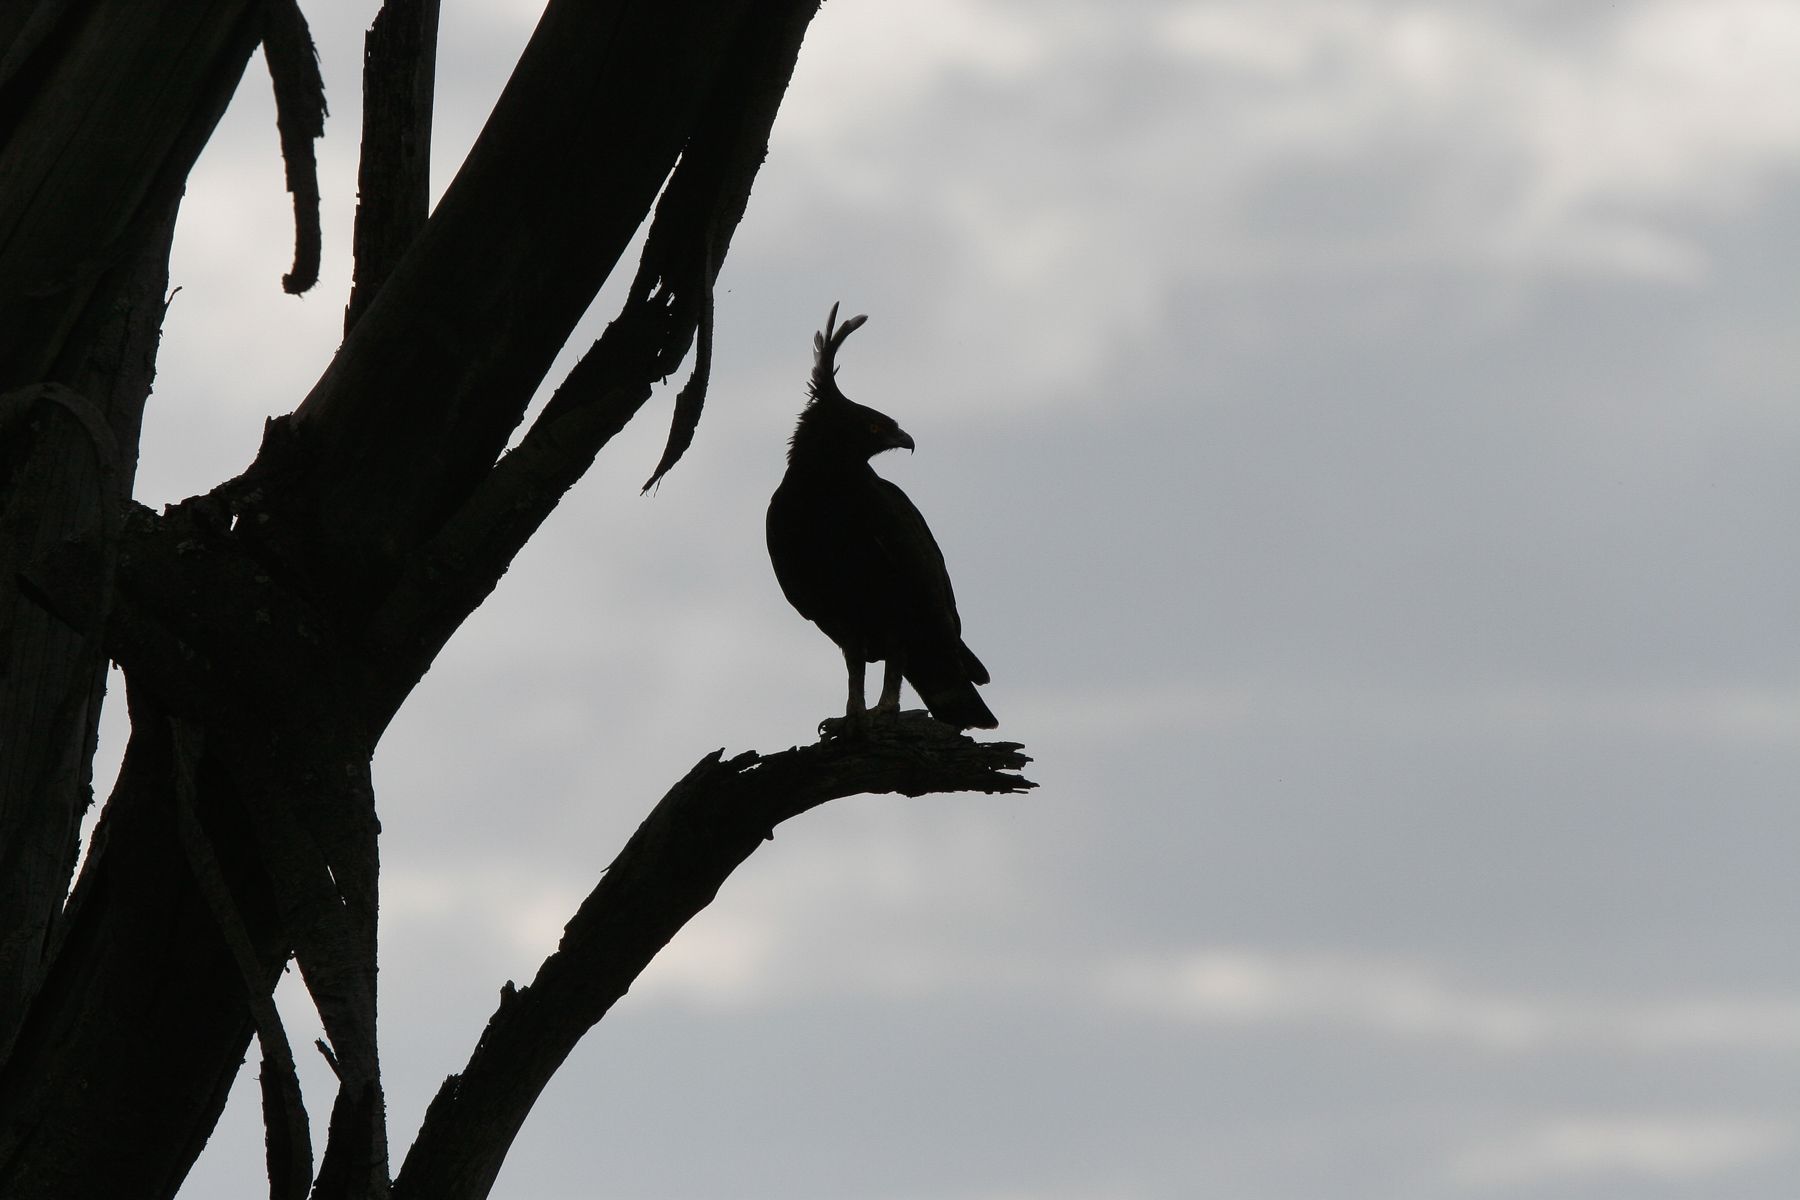 A Long-crested Eagle watches from a dead tree